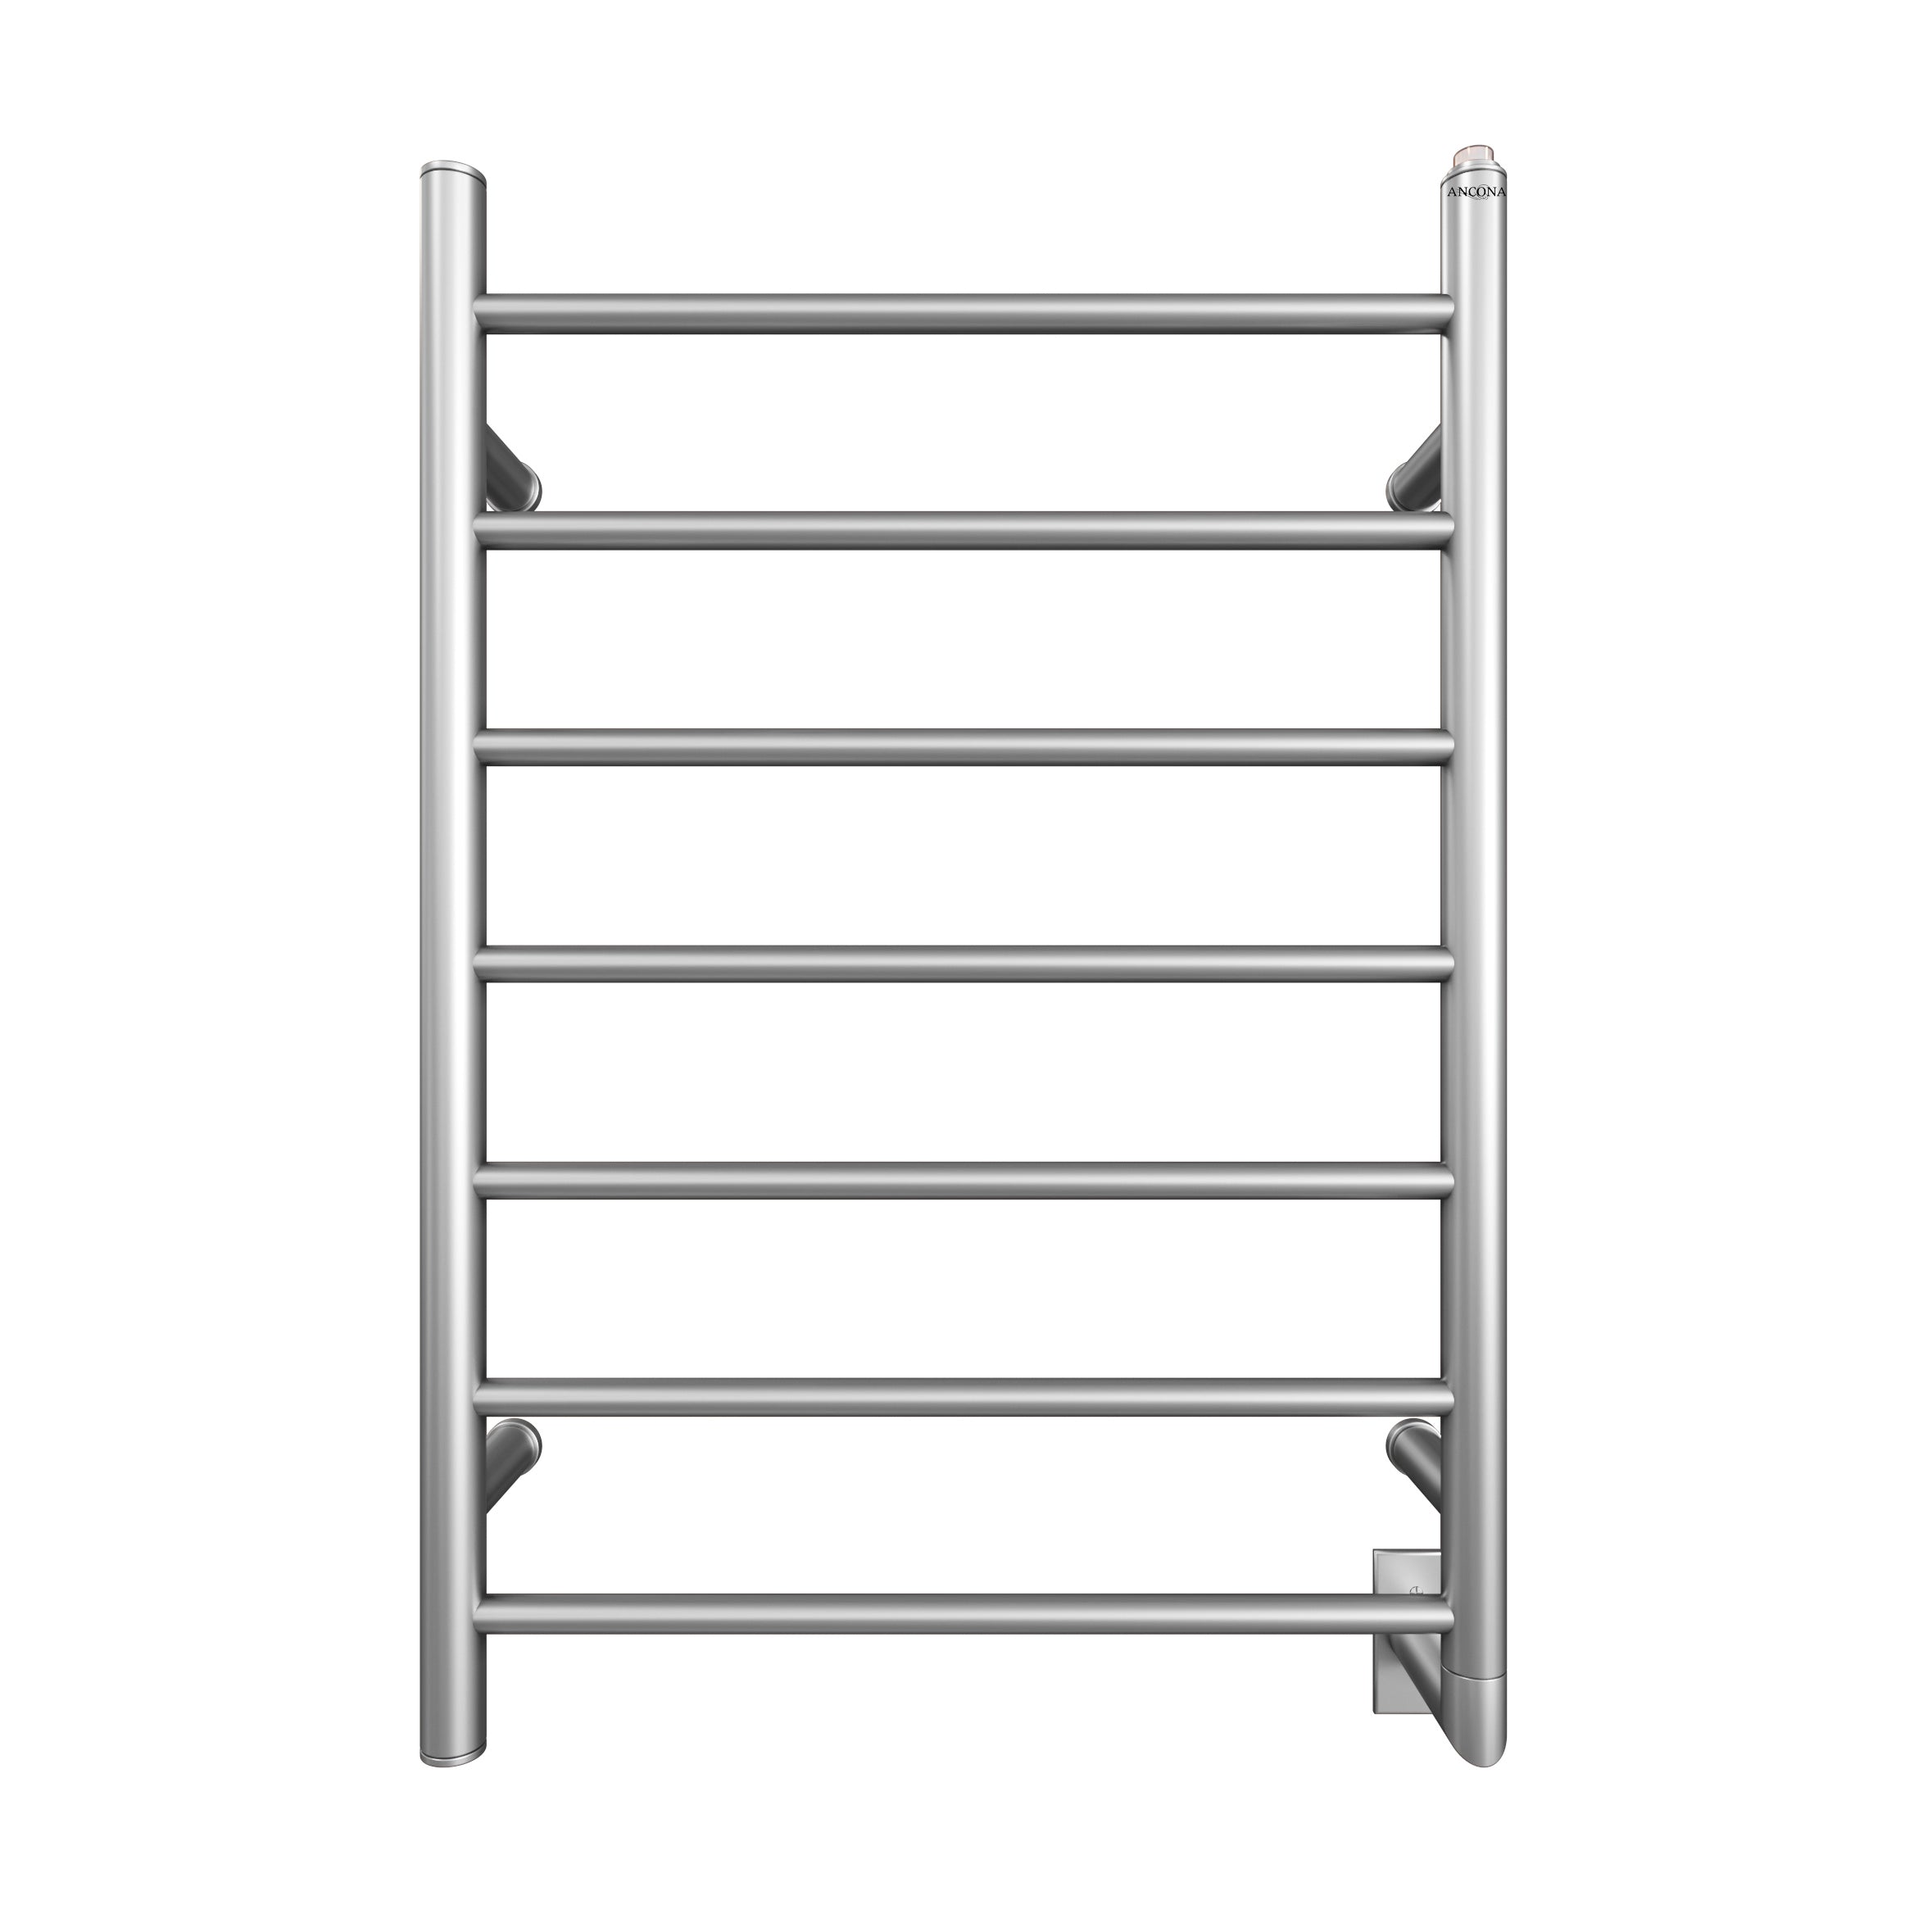 Comfort 7 - 31 in. Hardwired Electric Towel Warmer and Drying Rack in Brushed Stainless Steel